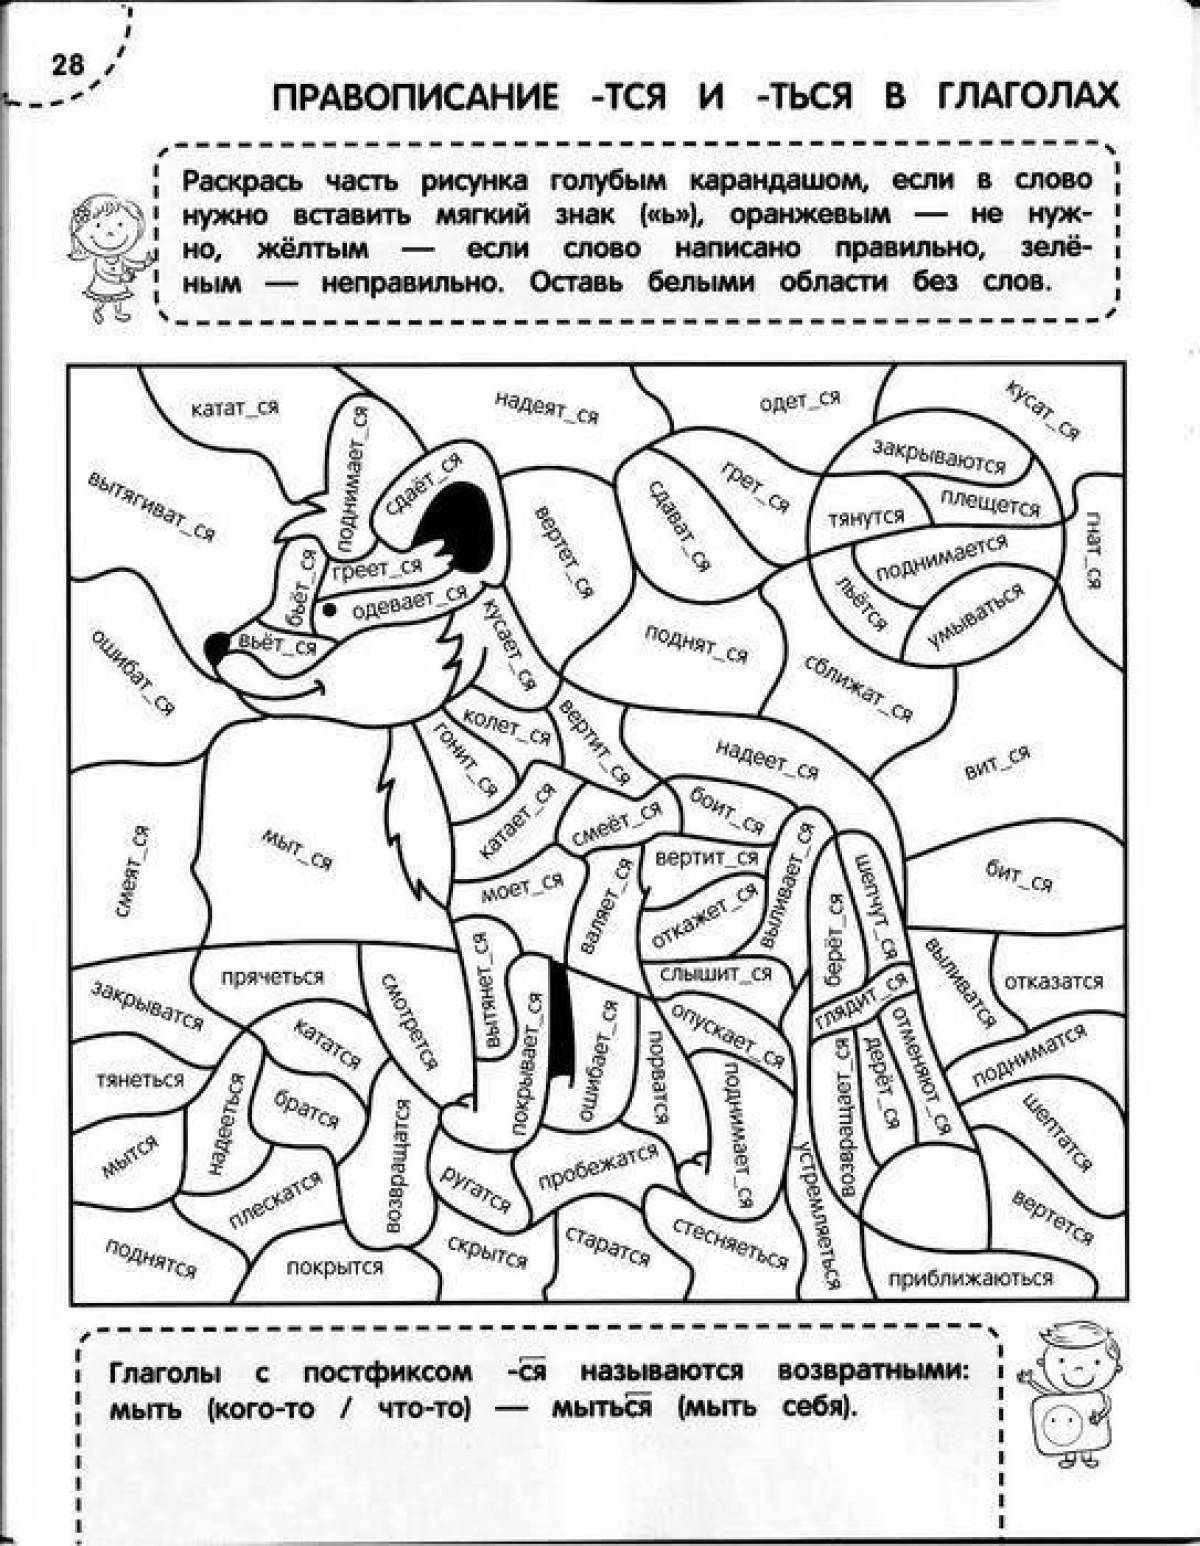 A fascinating coloring book in Russian for grade 1 with difficult tasks